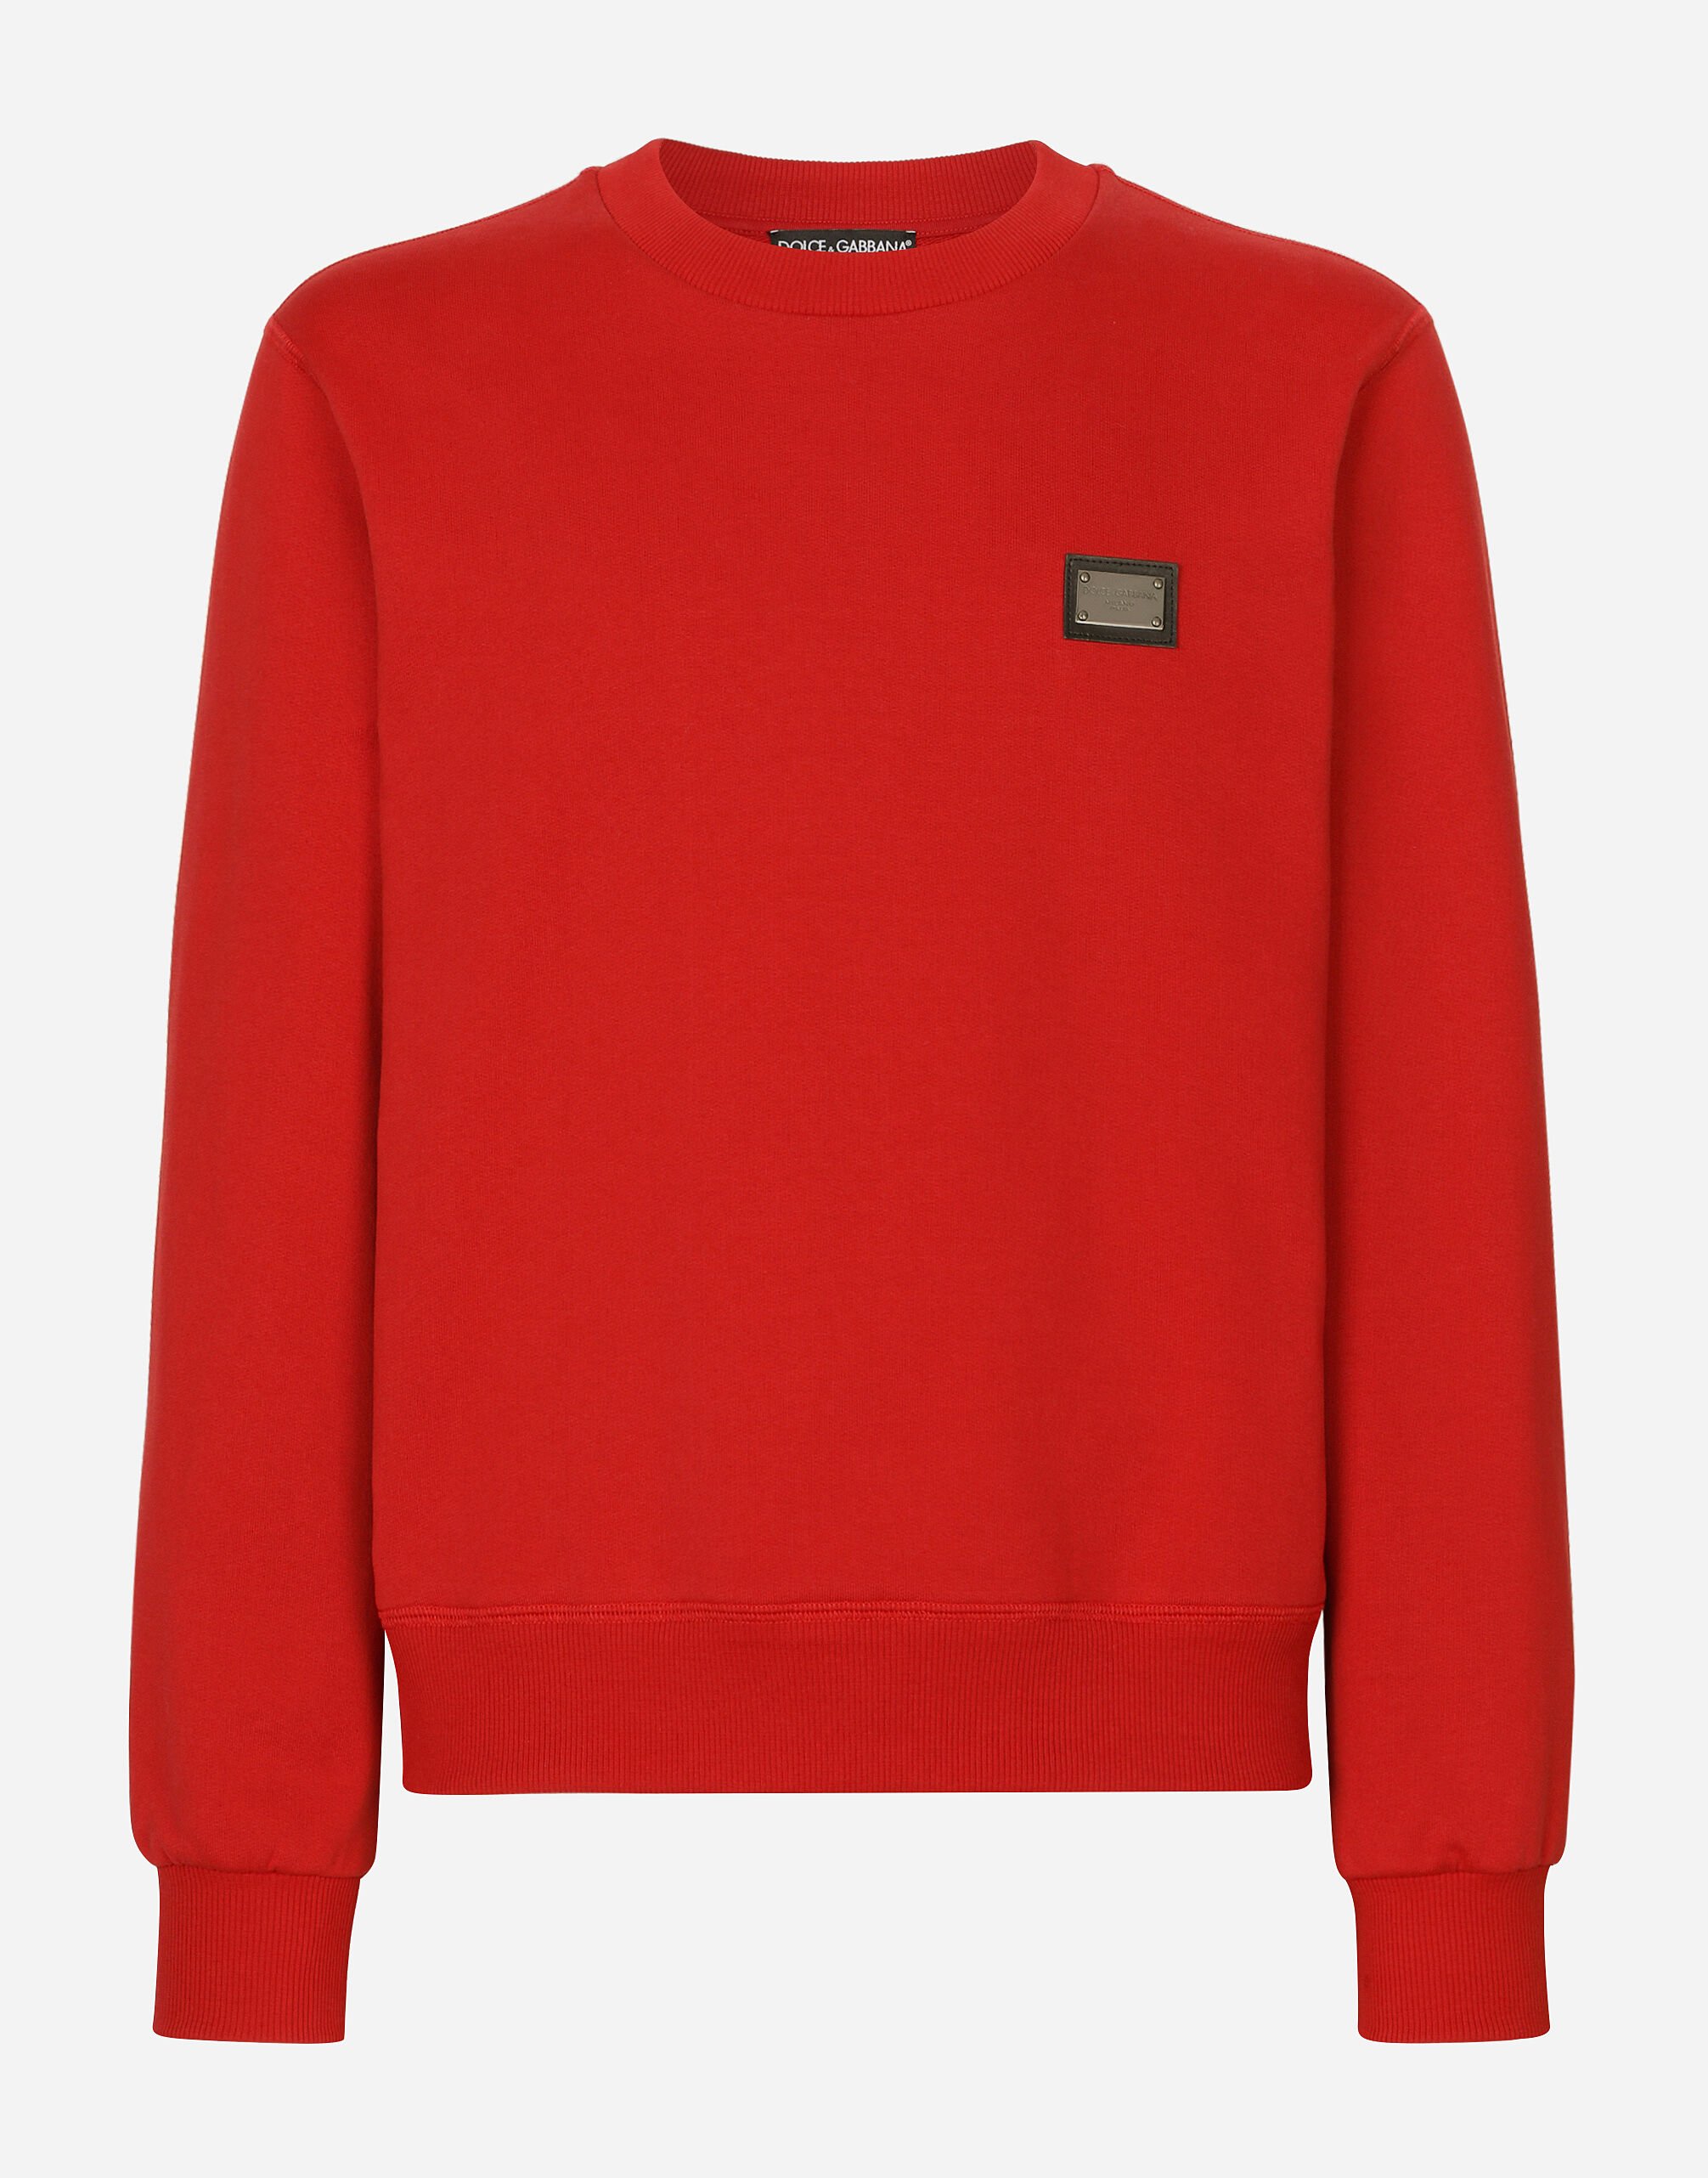 Dolce&Gabbana Jersey sweatshirt with branded tag Red G5IF1THI1KW